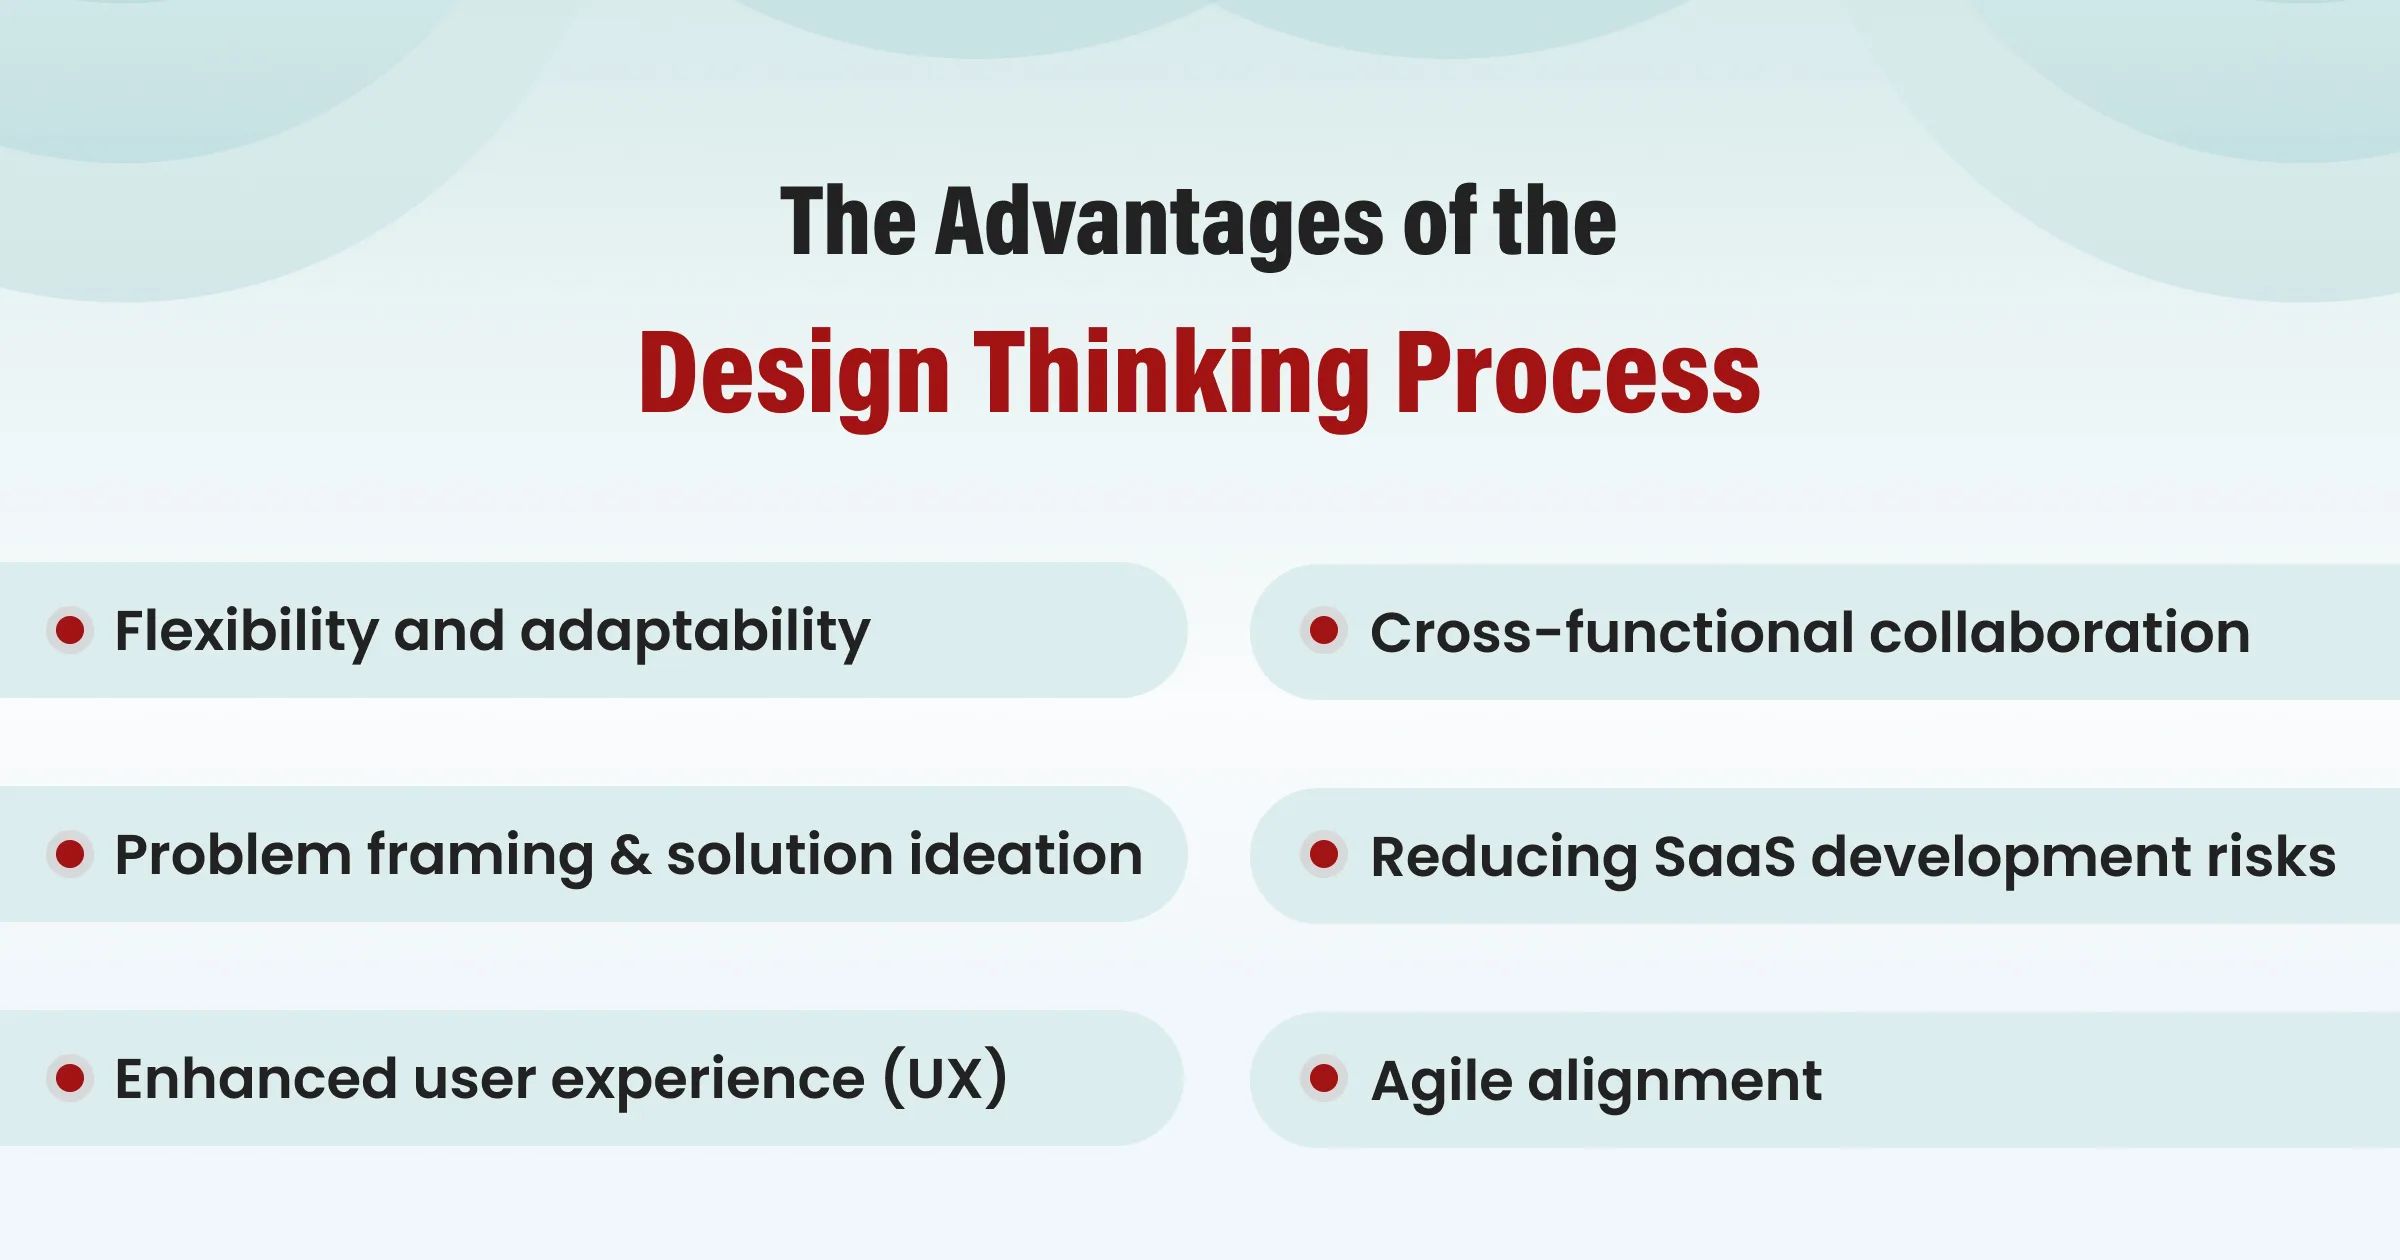 Advantages of the Design Thinking Process